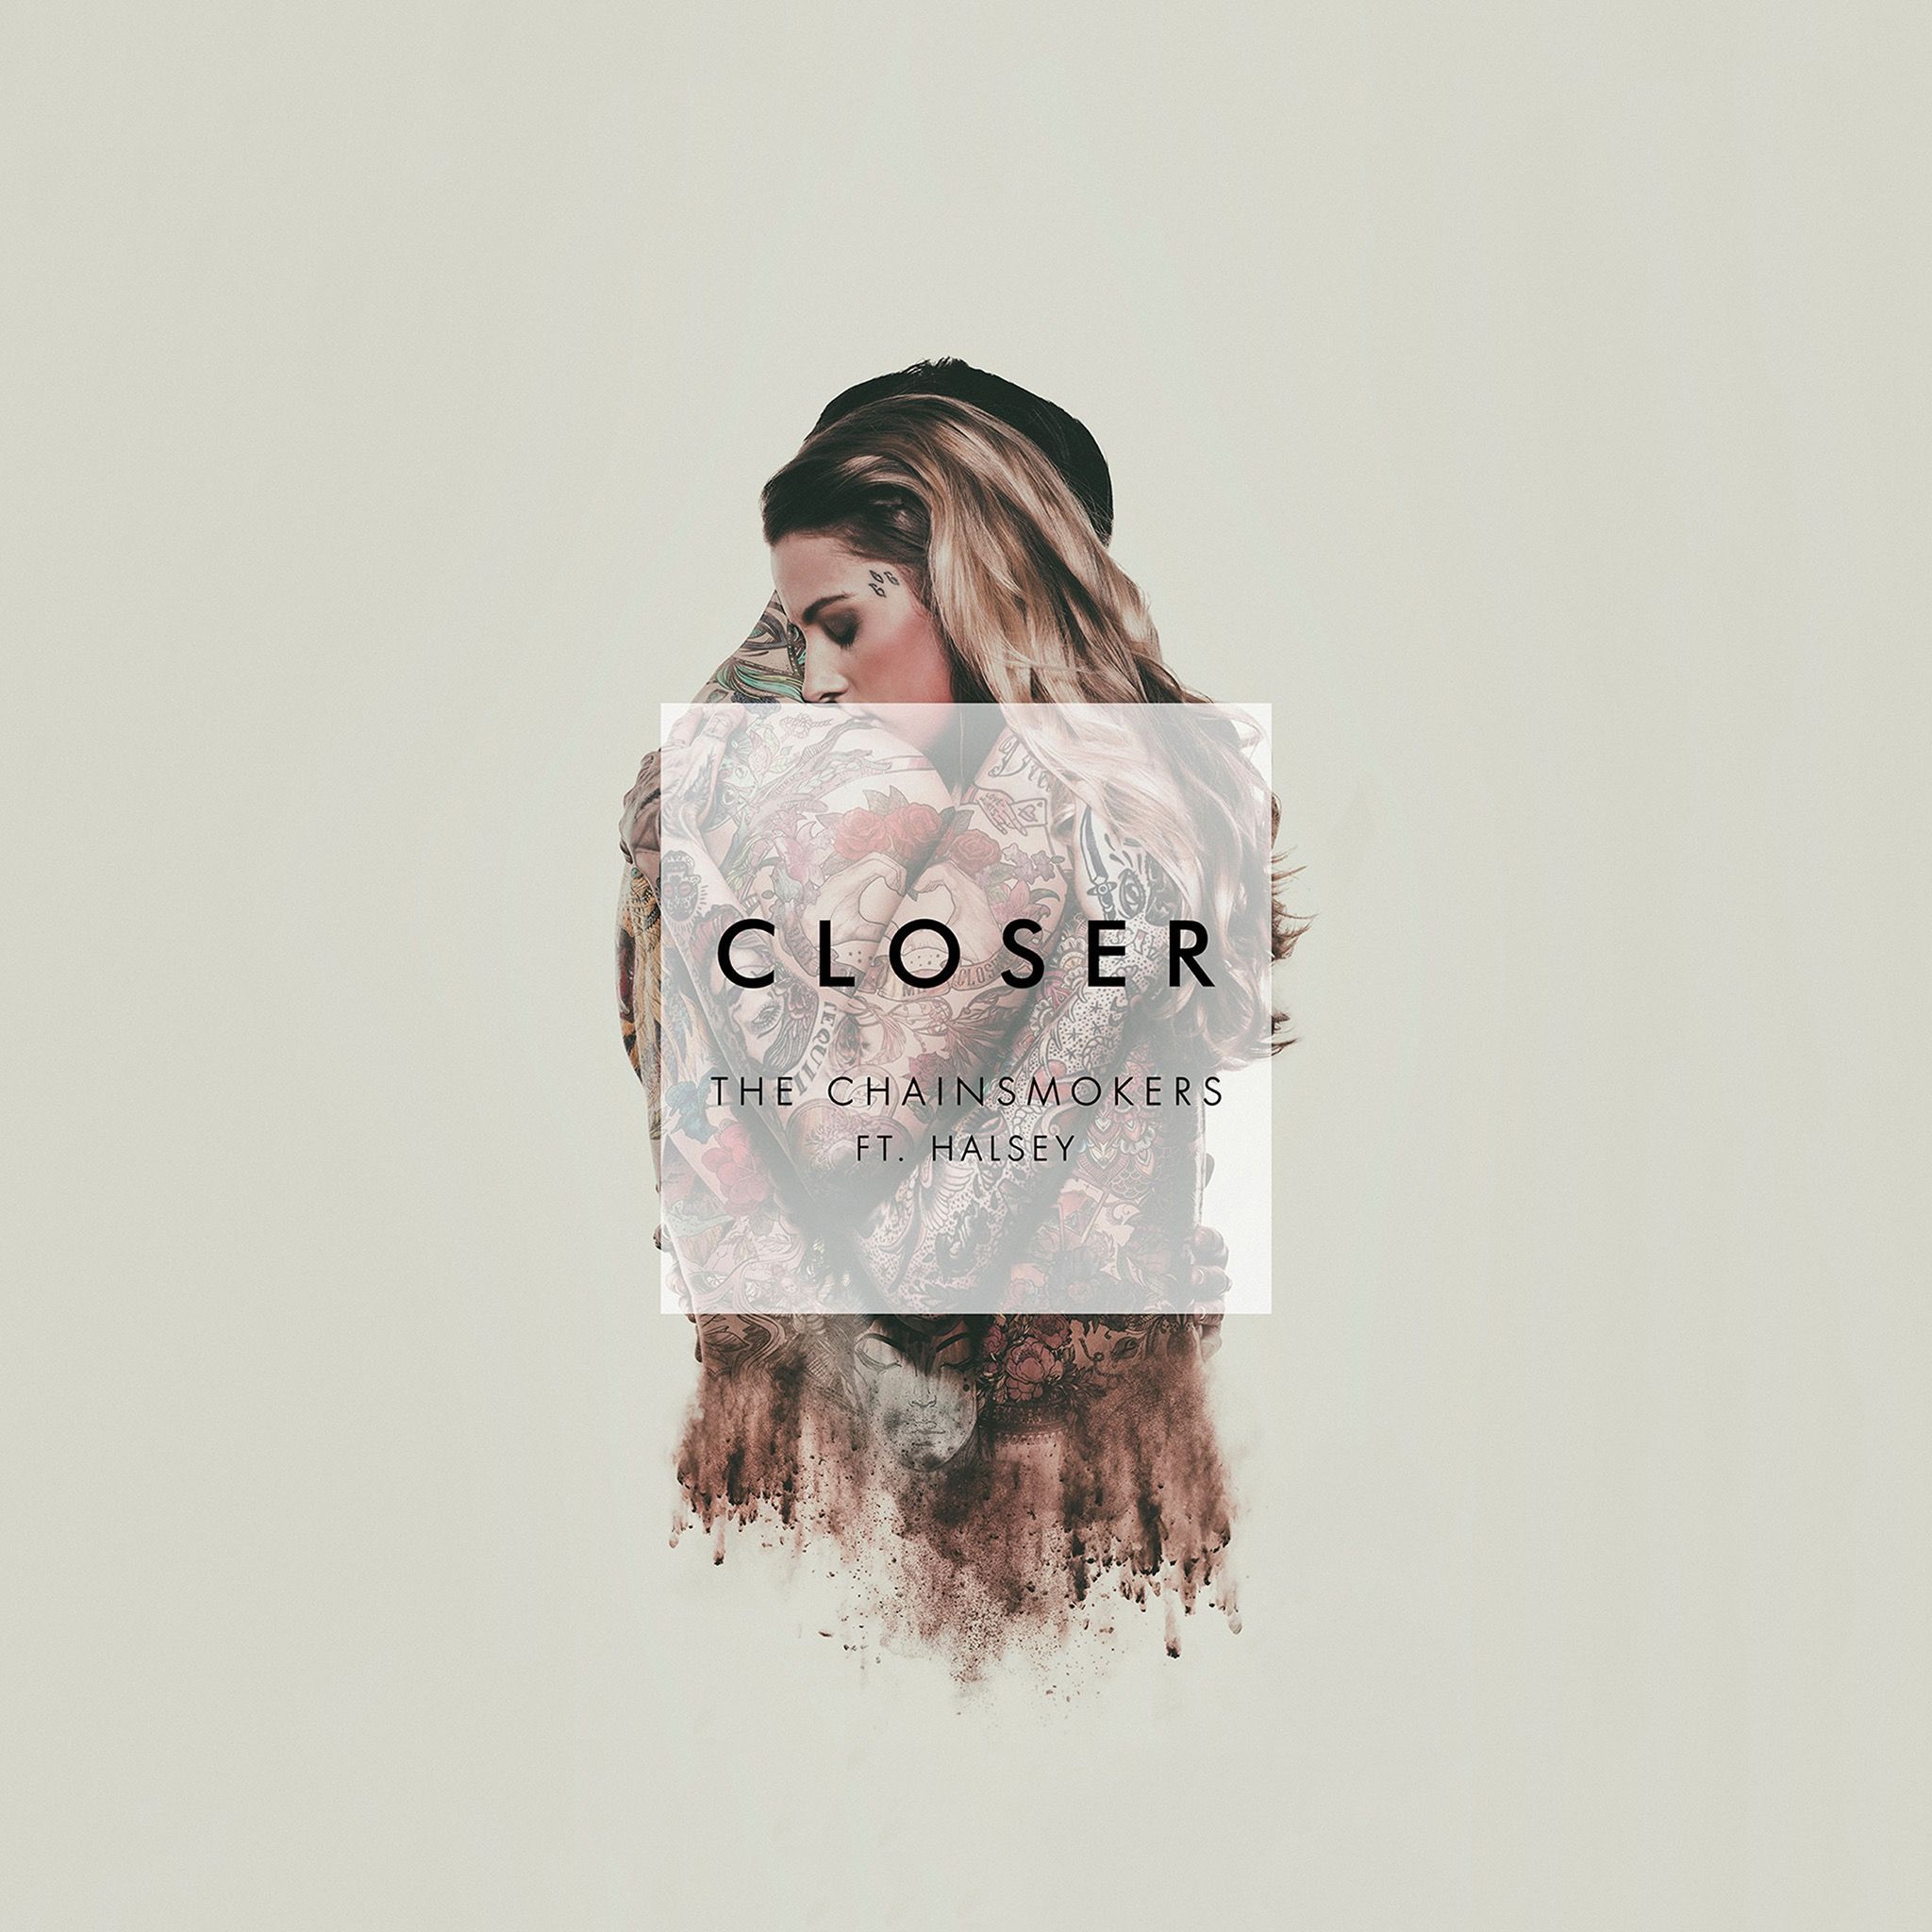 Chainsmokers Albums Cover Wallpapers on